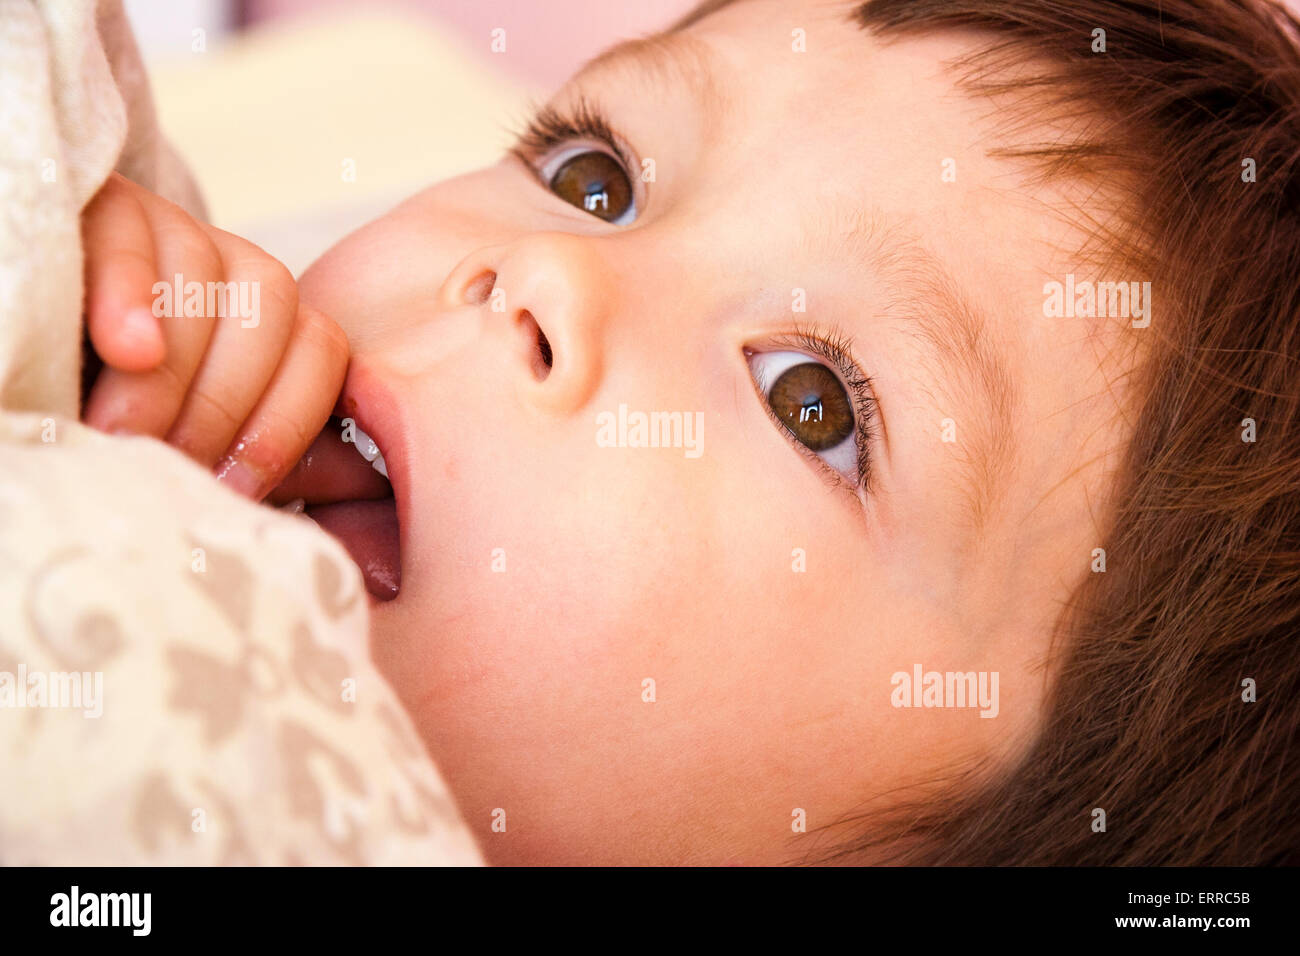 Close up of angelic small child, boy, 3-4 year old, head shot. Laying under duvet and biting thumb as he thinks hard about something. Stock Photo